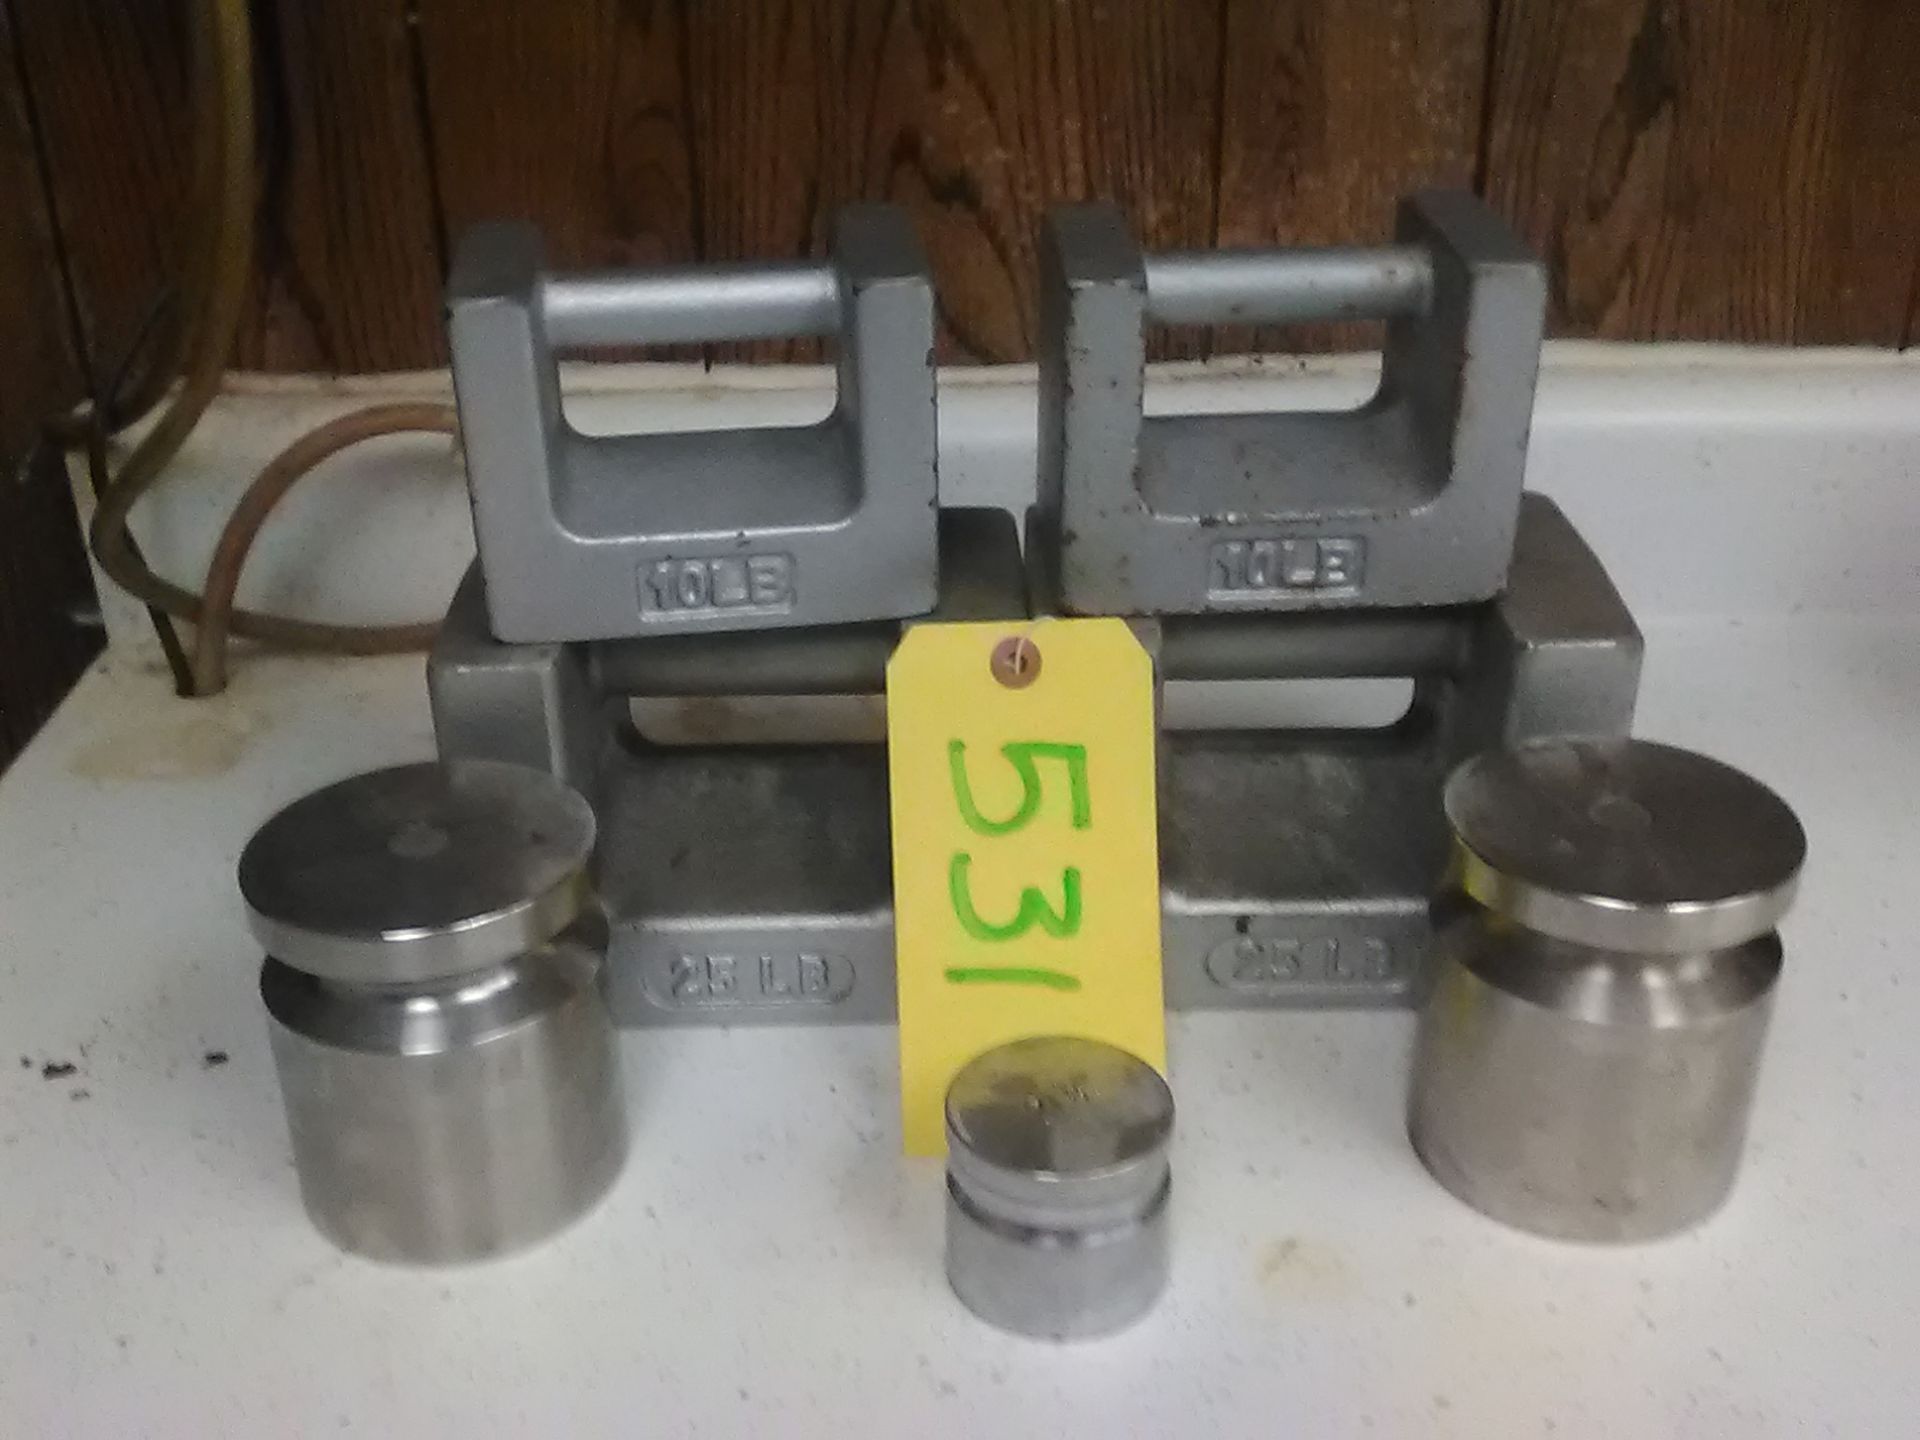 SCALE TEST WEIGHTS